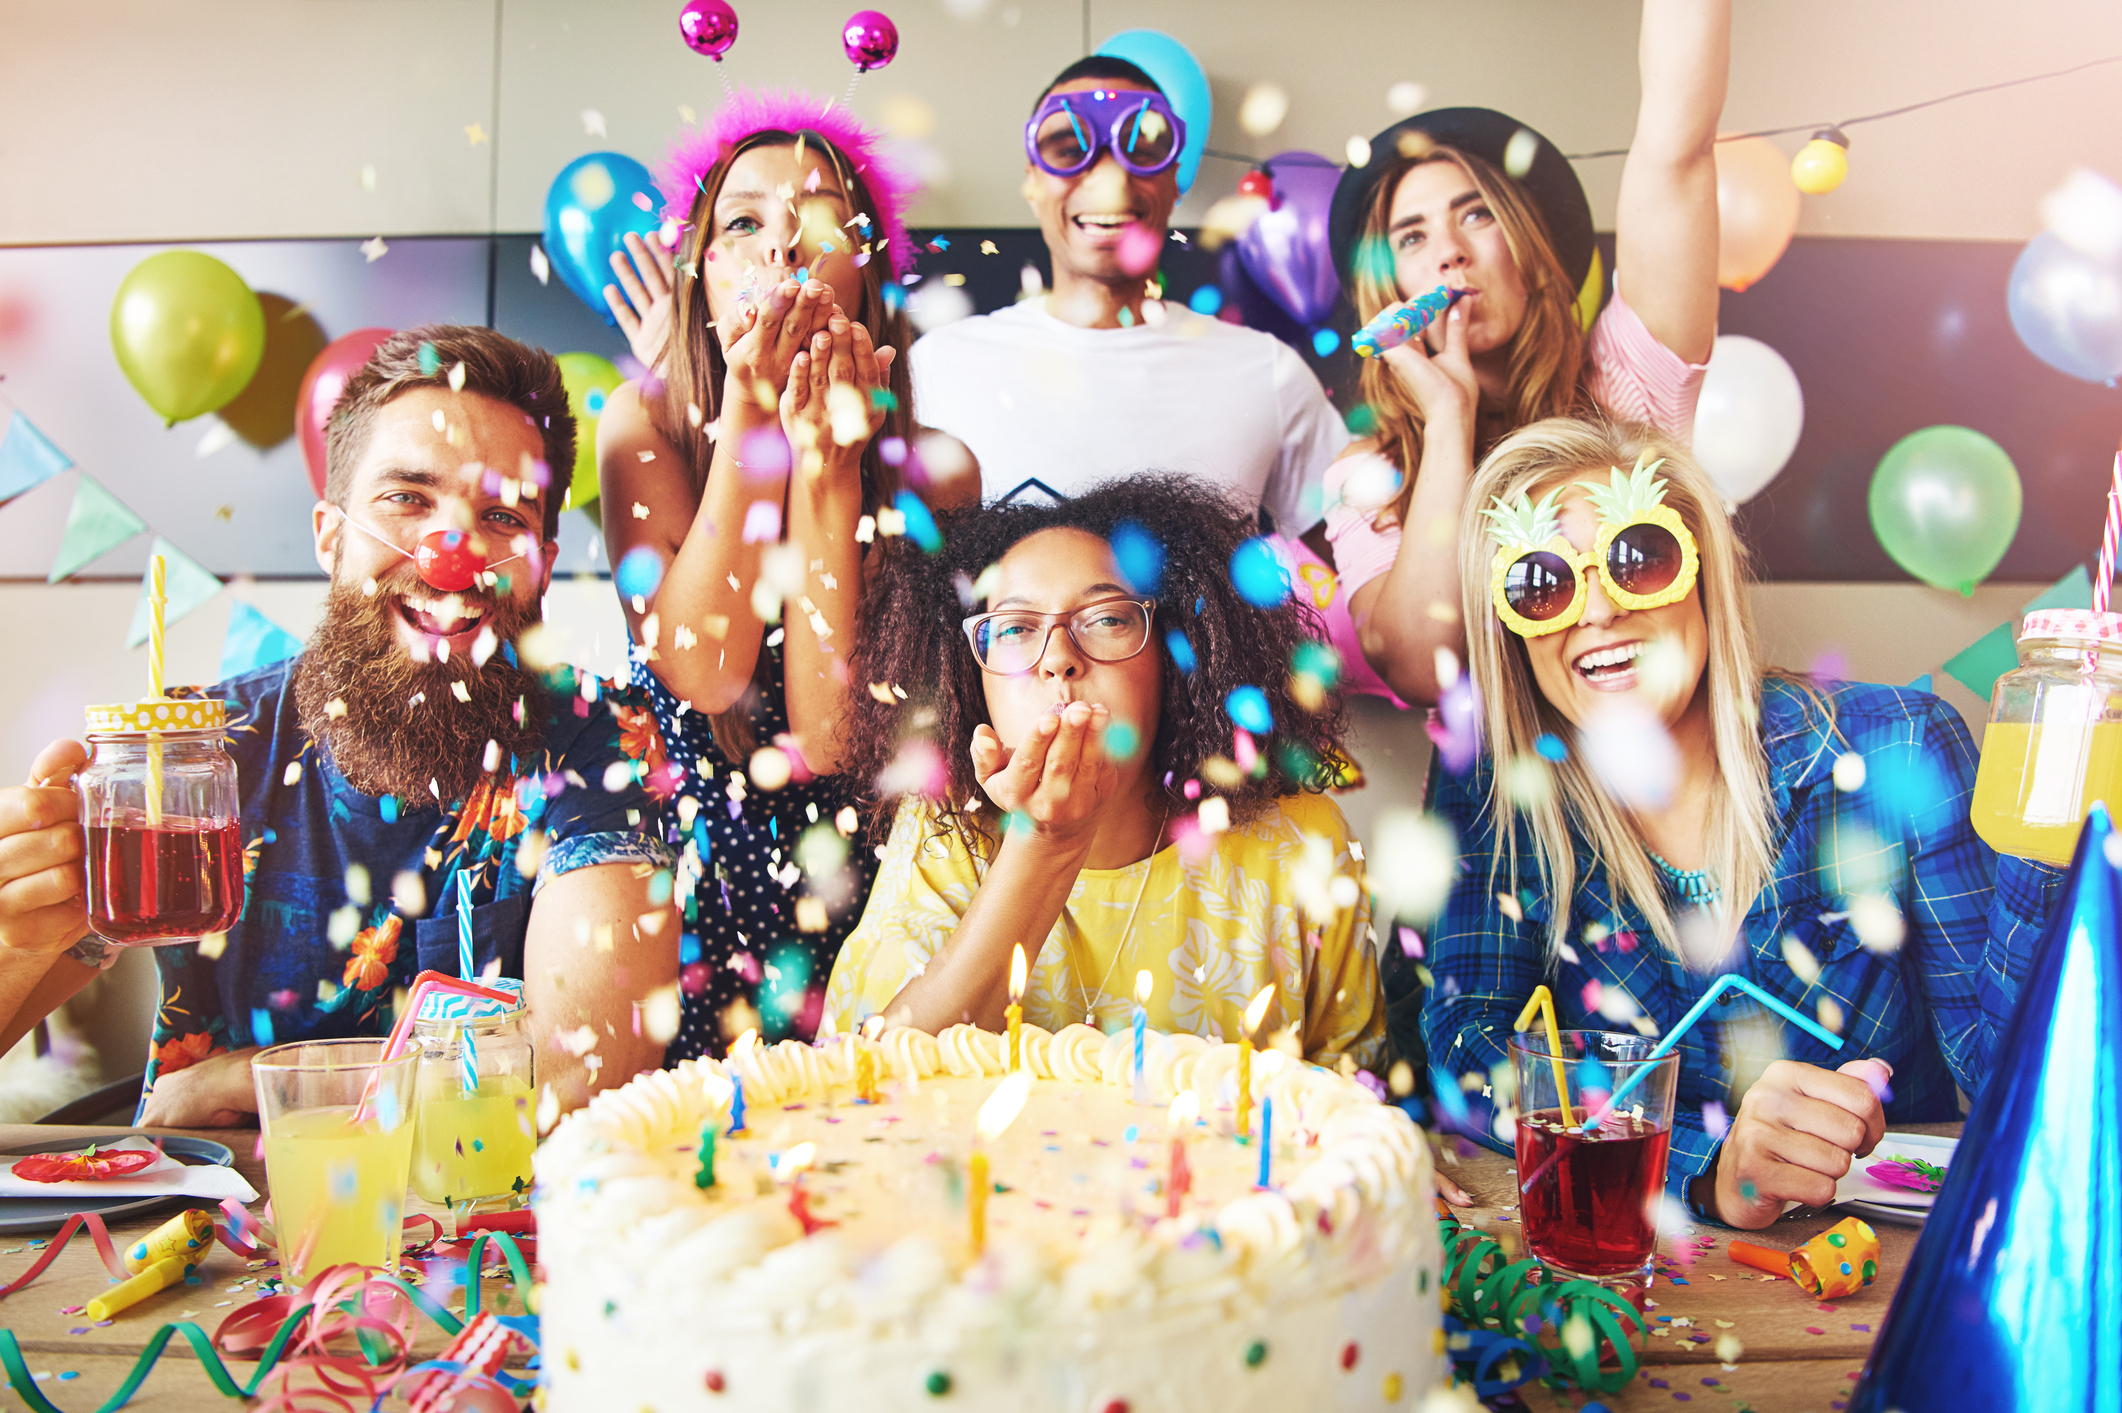 How To Pick The Perfect Backdrop For An Adult Birthday Party